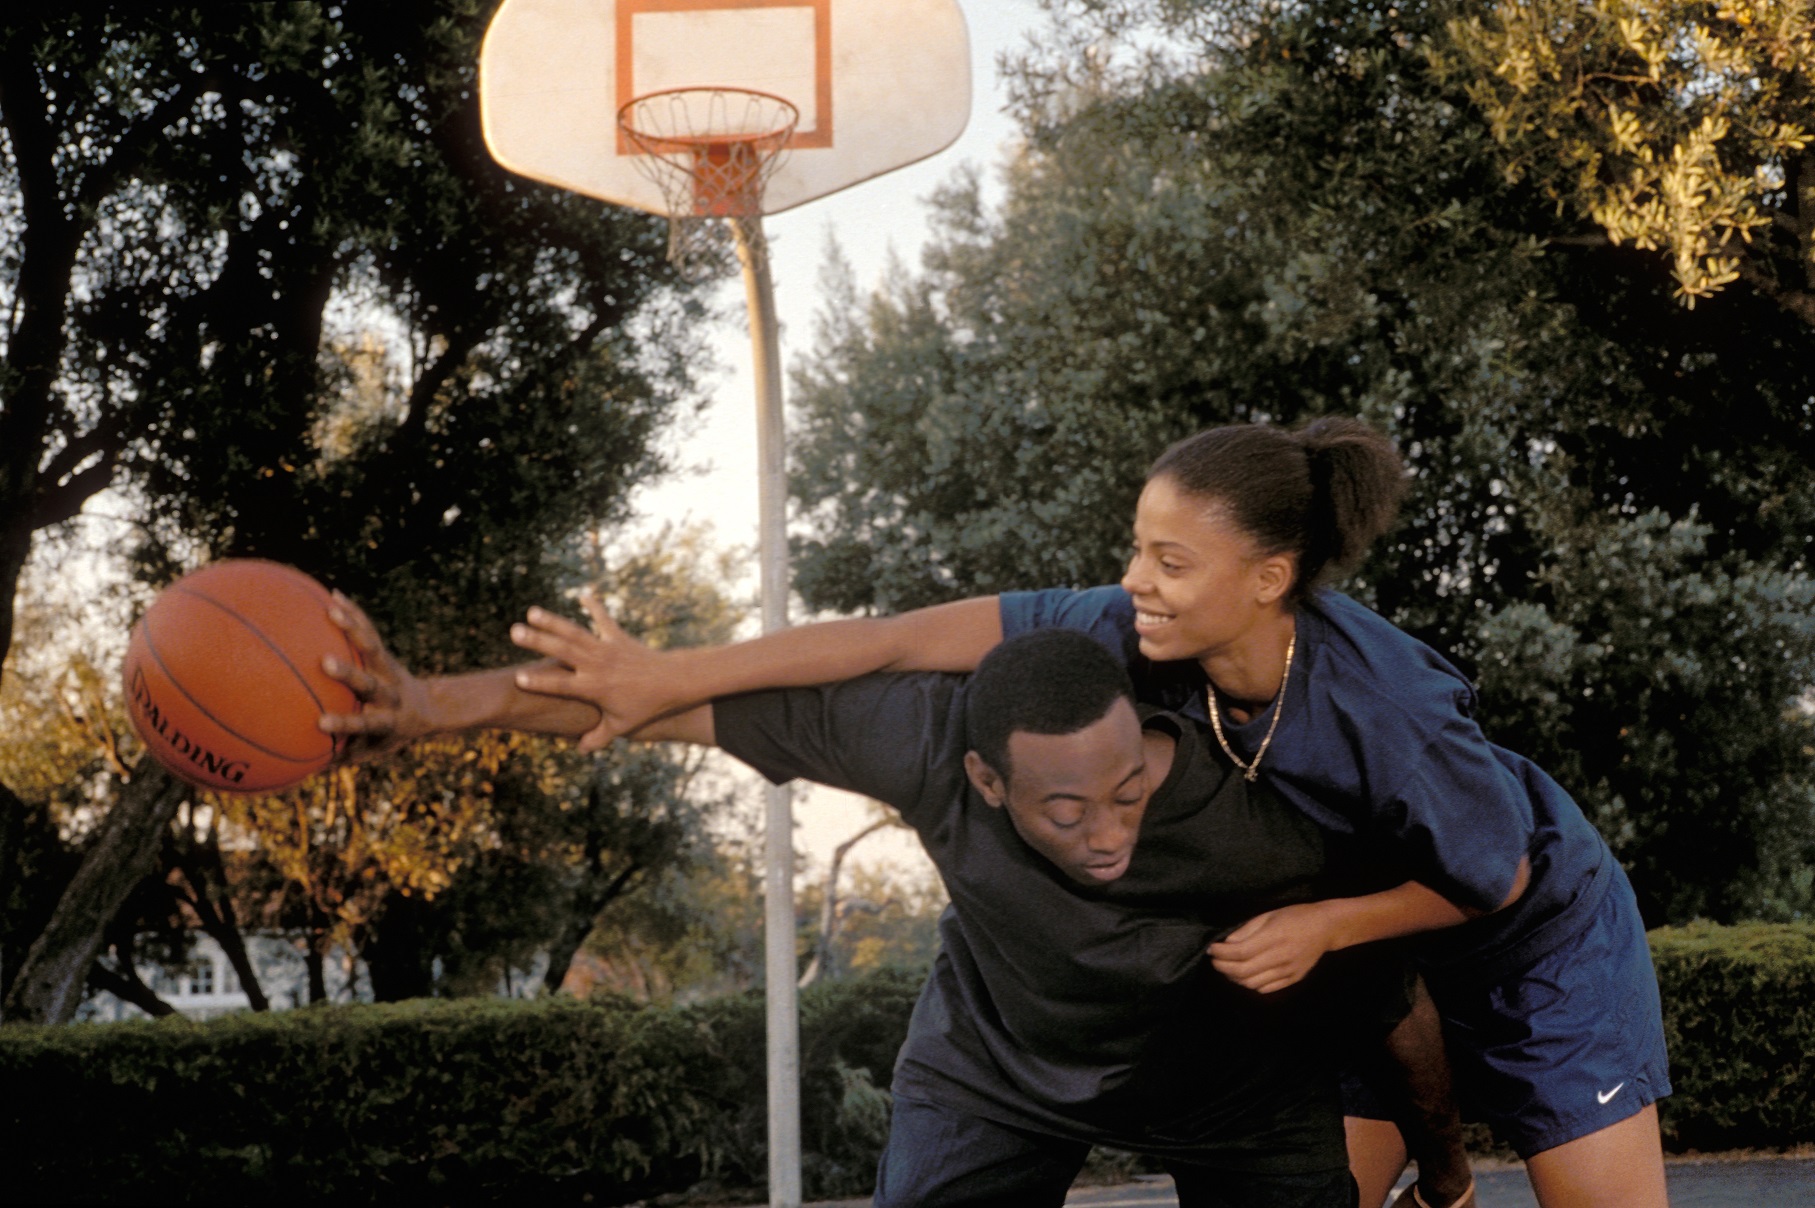 Love and Basketball: 5 temps forts d'une love story mythique